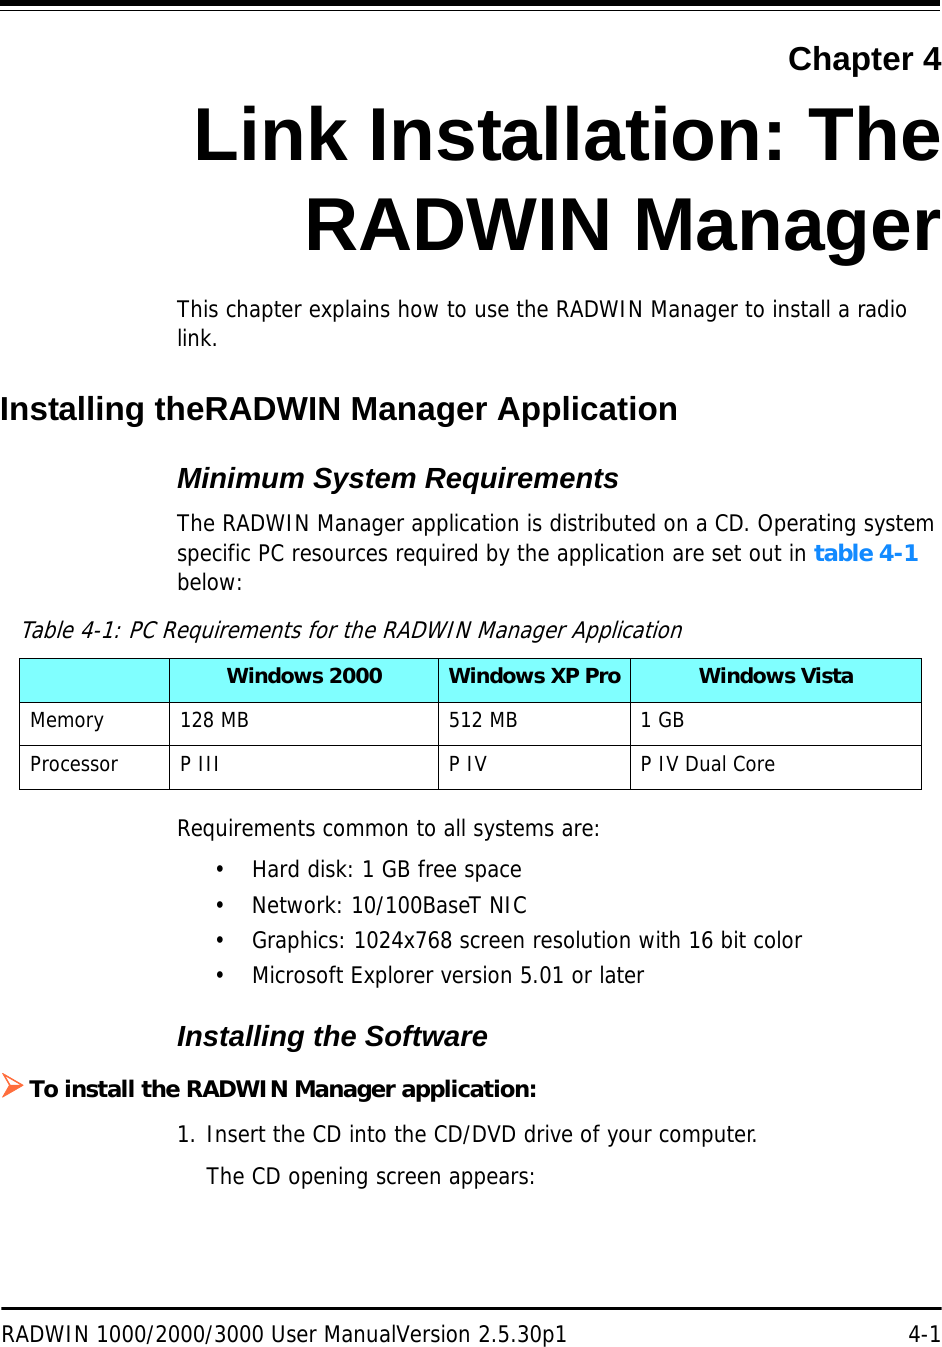 RADWIN 1000/2000/3000 User ManualVersion 2.5.30p1 4-1Chapter 4Link Installation: TheRADWIN ManagerThis chapter explains how to use the RADWIN Manager to install a radio link.Installing theRADWIN Manager ApplicationMinimum System RequirementsThe RADWIN Manager application is distributed on a CD. Operating system specific PC resources required by the application are set out in table 4-1 below:Requirements common to all systems are:• Hard disk: 1 GB free space• Network: 10/100BaseT NIC• Graphics: 1024x768 screen resolution with 16 bit color• Microsoft Explorer version 5.01 or laterInstalling the Software¾To install the RADWIN Manager application:1. Insert the CD into the CD/DVD drive of your computer.The CD opening screen appears:Table 4-1: PC Requirements for the RADWIN Manager ApplicationWindows 2000 Windows XP Pro Windows VistaMemory 128 MB 512 MB 1 GBProcessor P III P IV P IV Dual Core